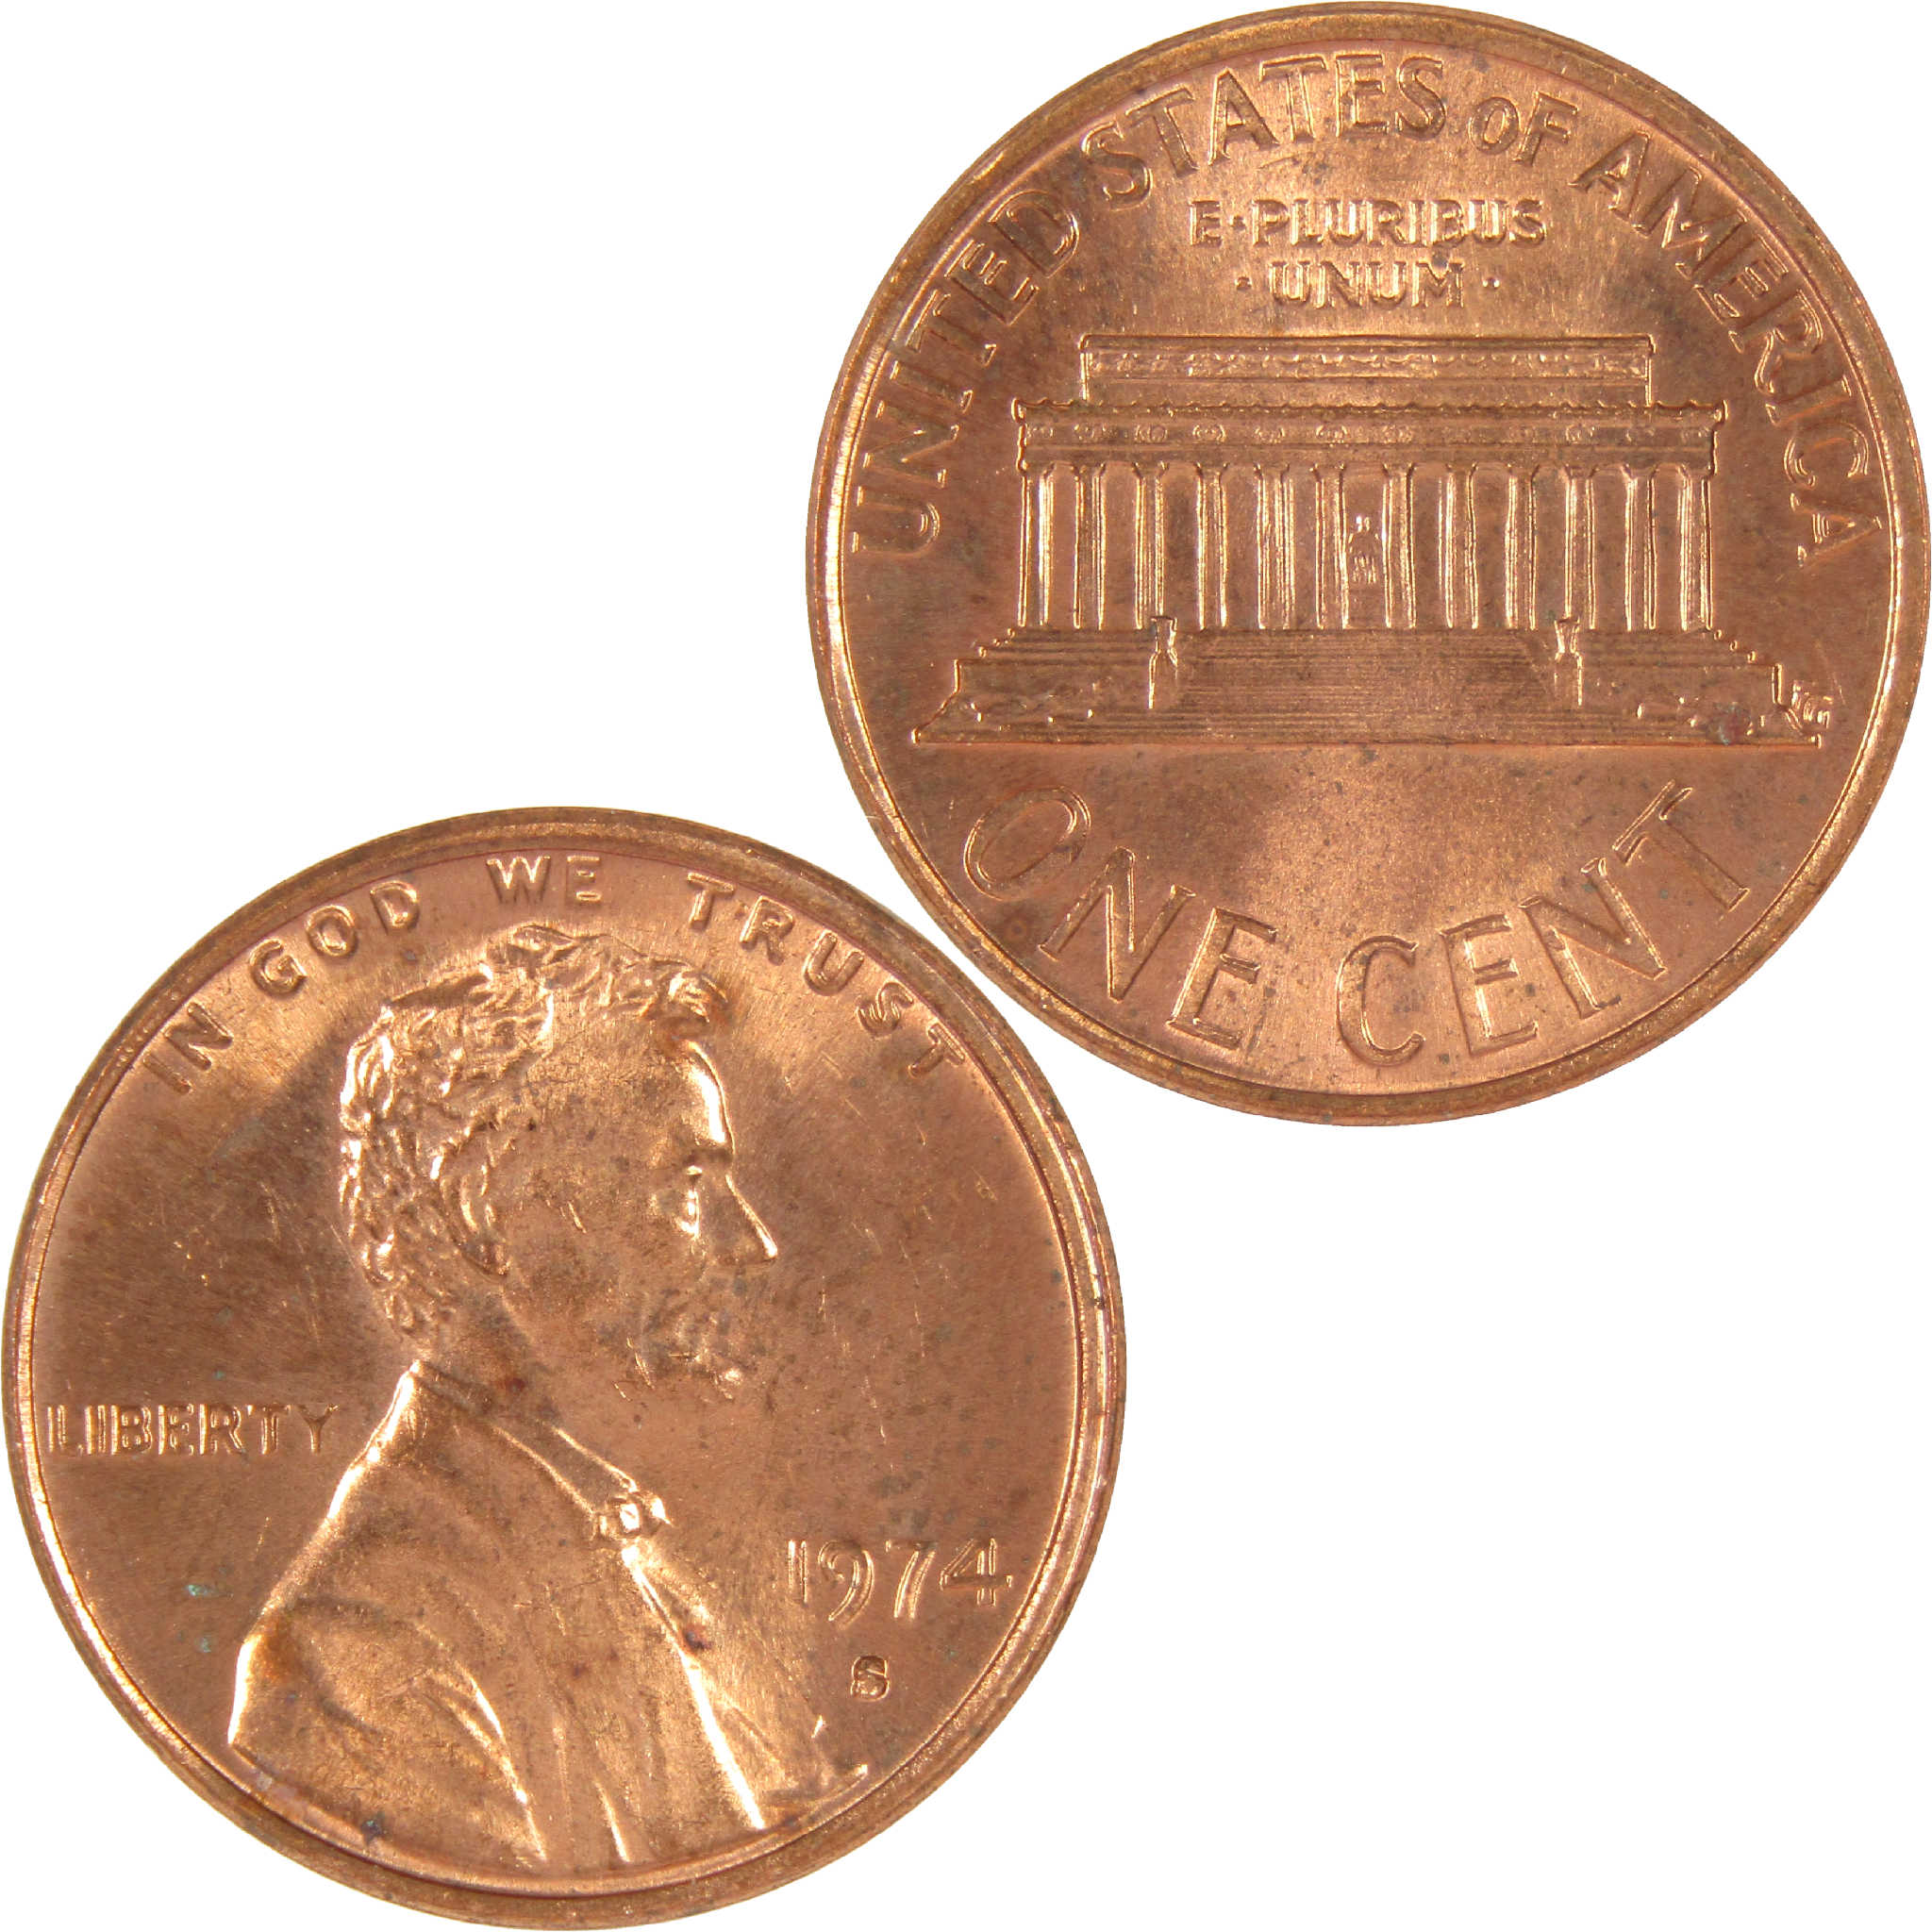 1974 S Lincoln Memorial Cent BU Uncirculated Penny 1c Coin